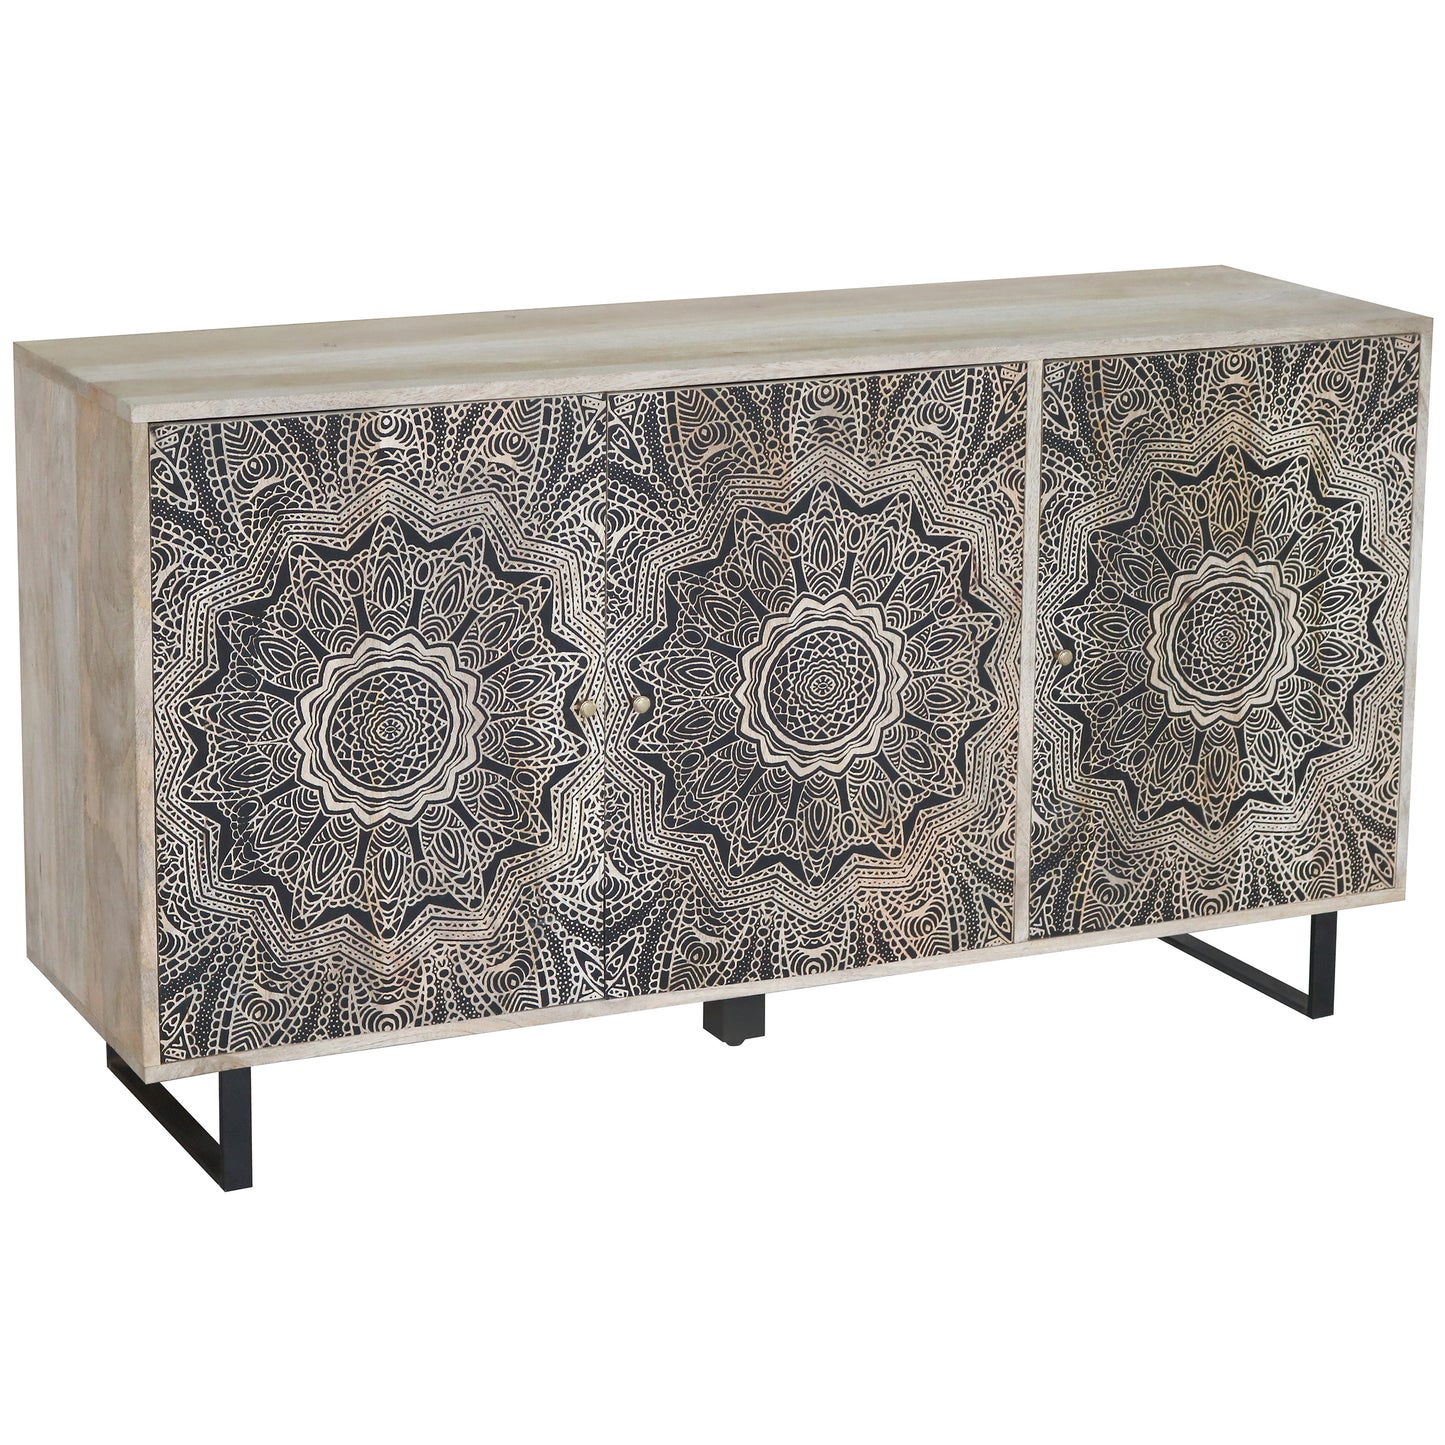 Right angled farmhouse natural and black three-door accent cabinet with medallion designs on a white background